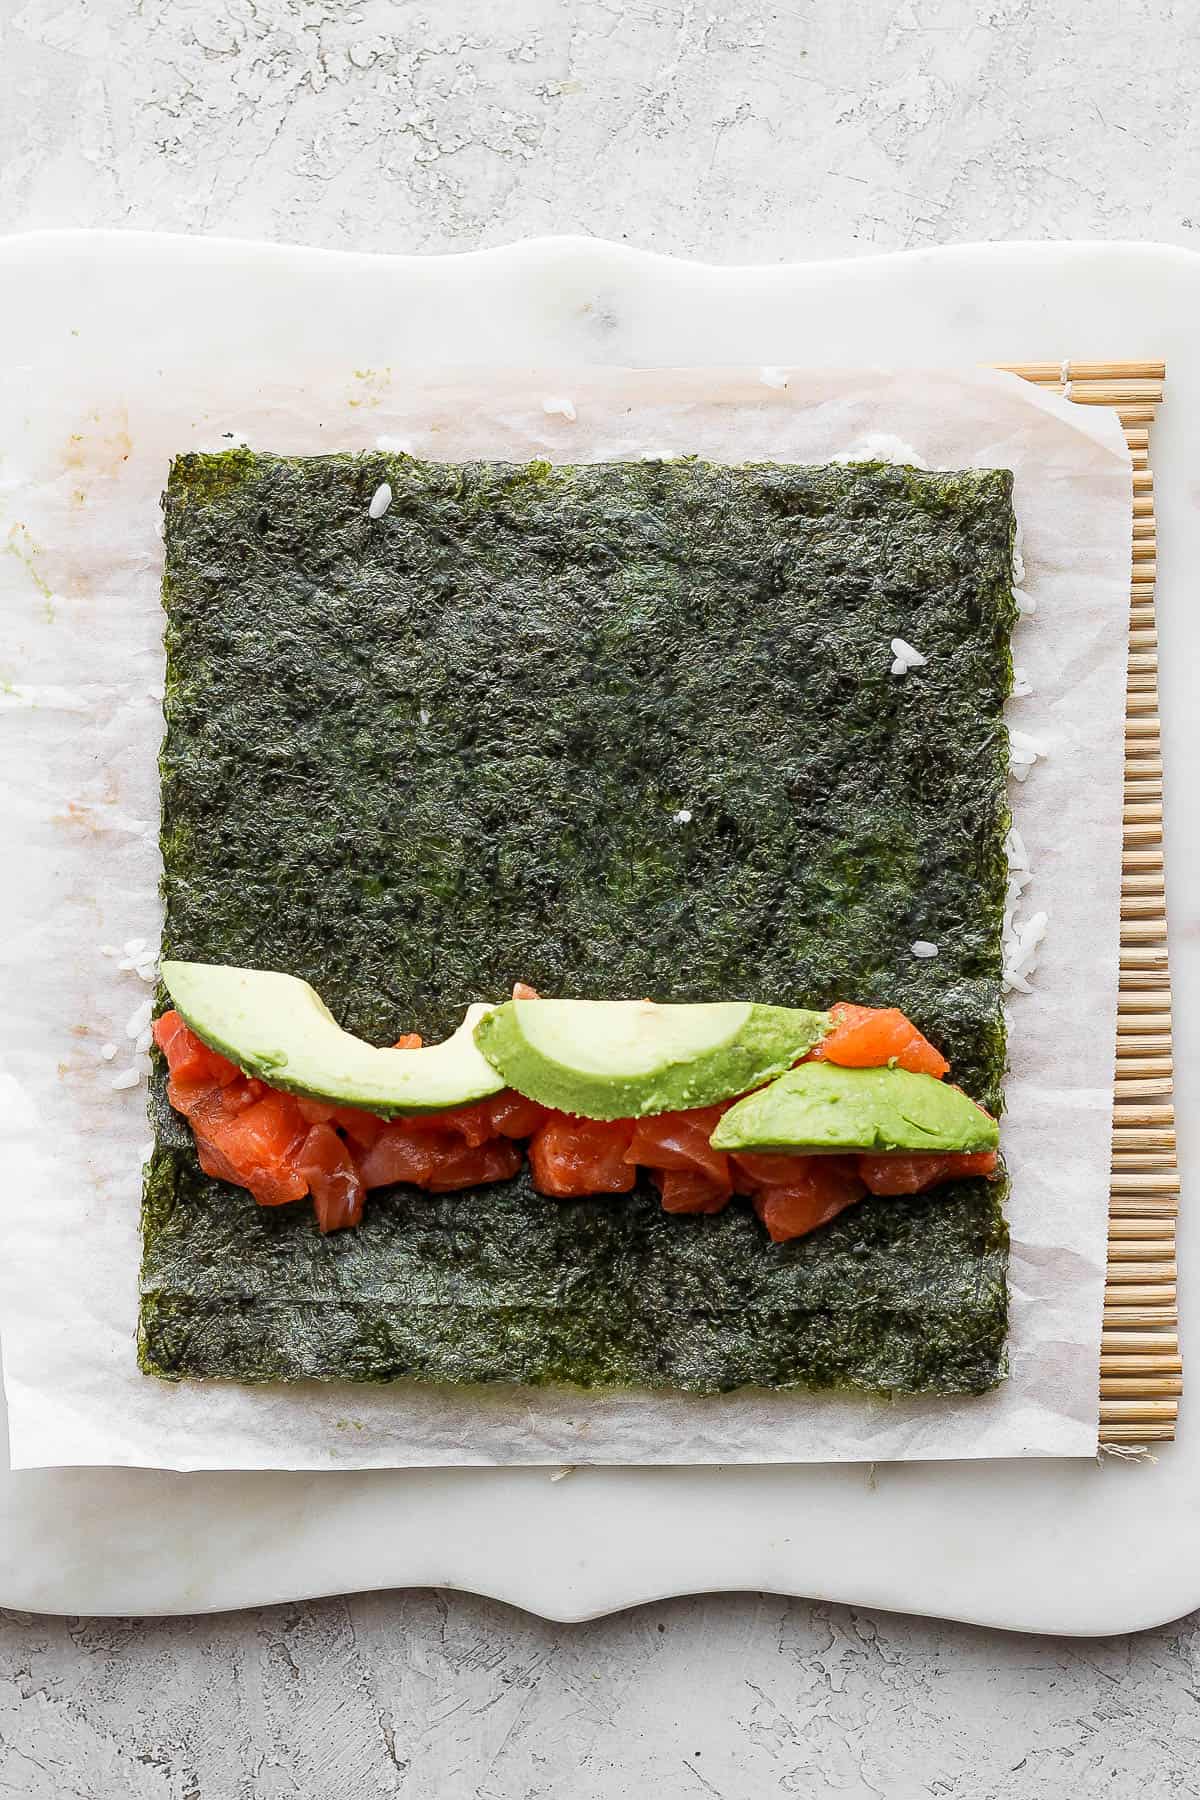 The filling ingredients added towards the bottom of the nori sheet.